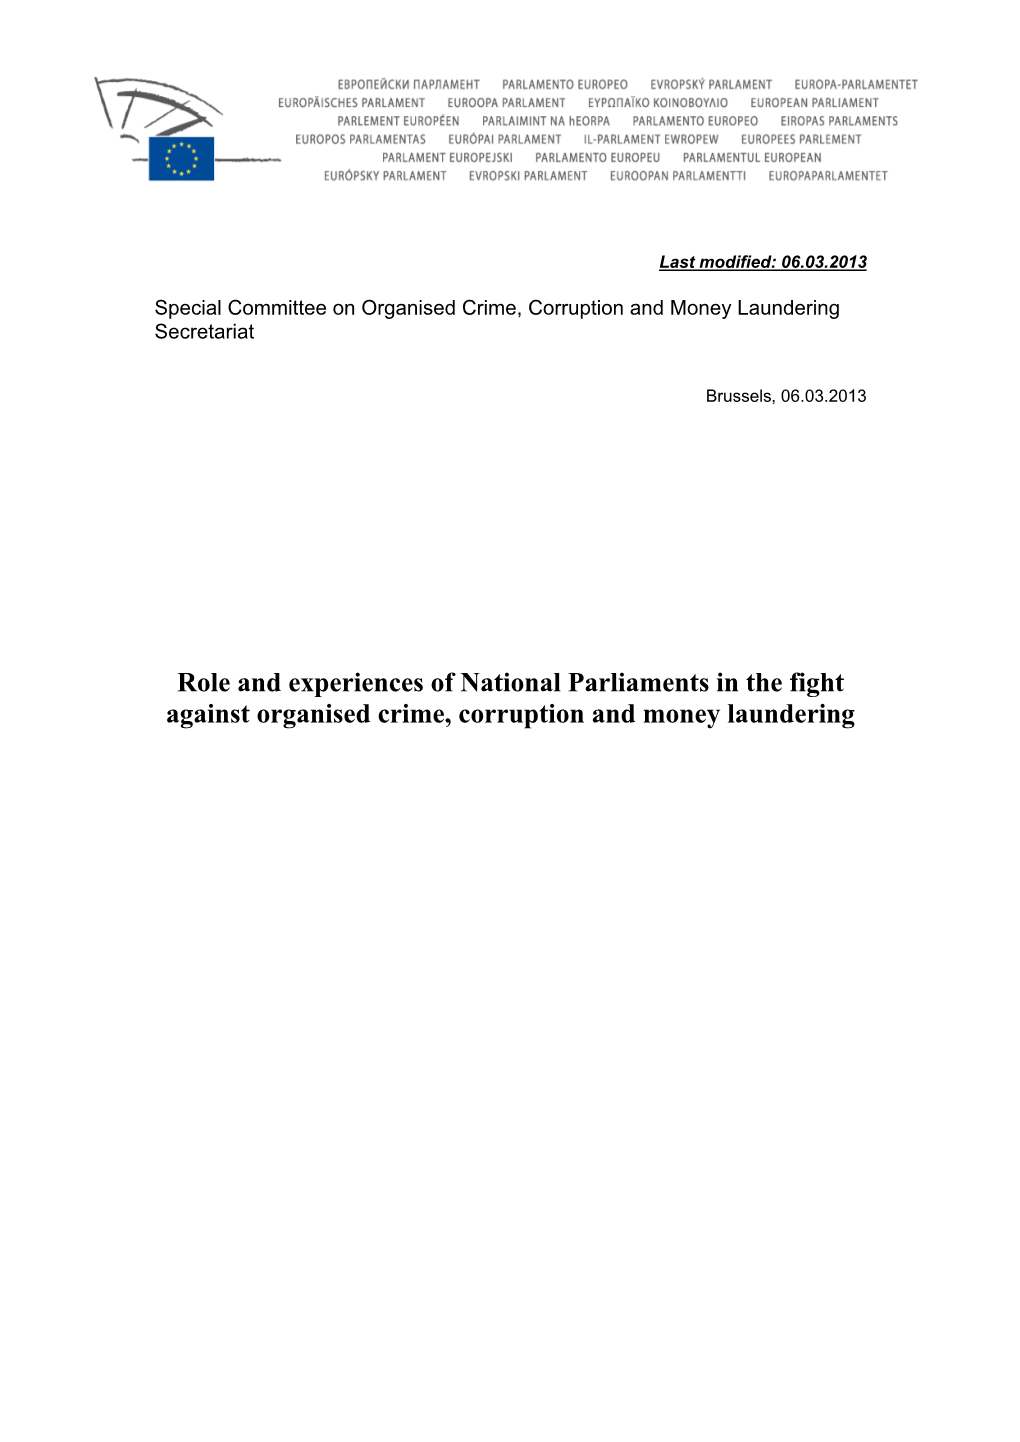 Role and Experiences of National Parliaments in the Fight Against